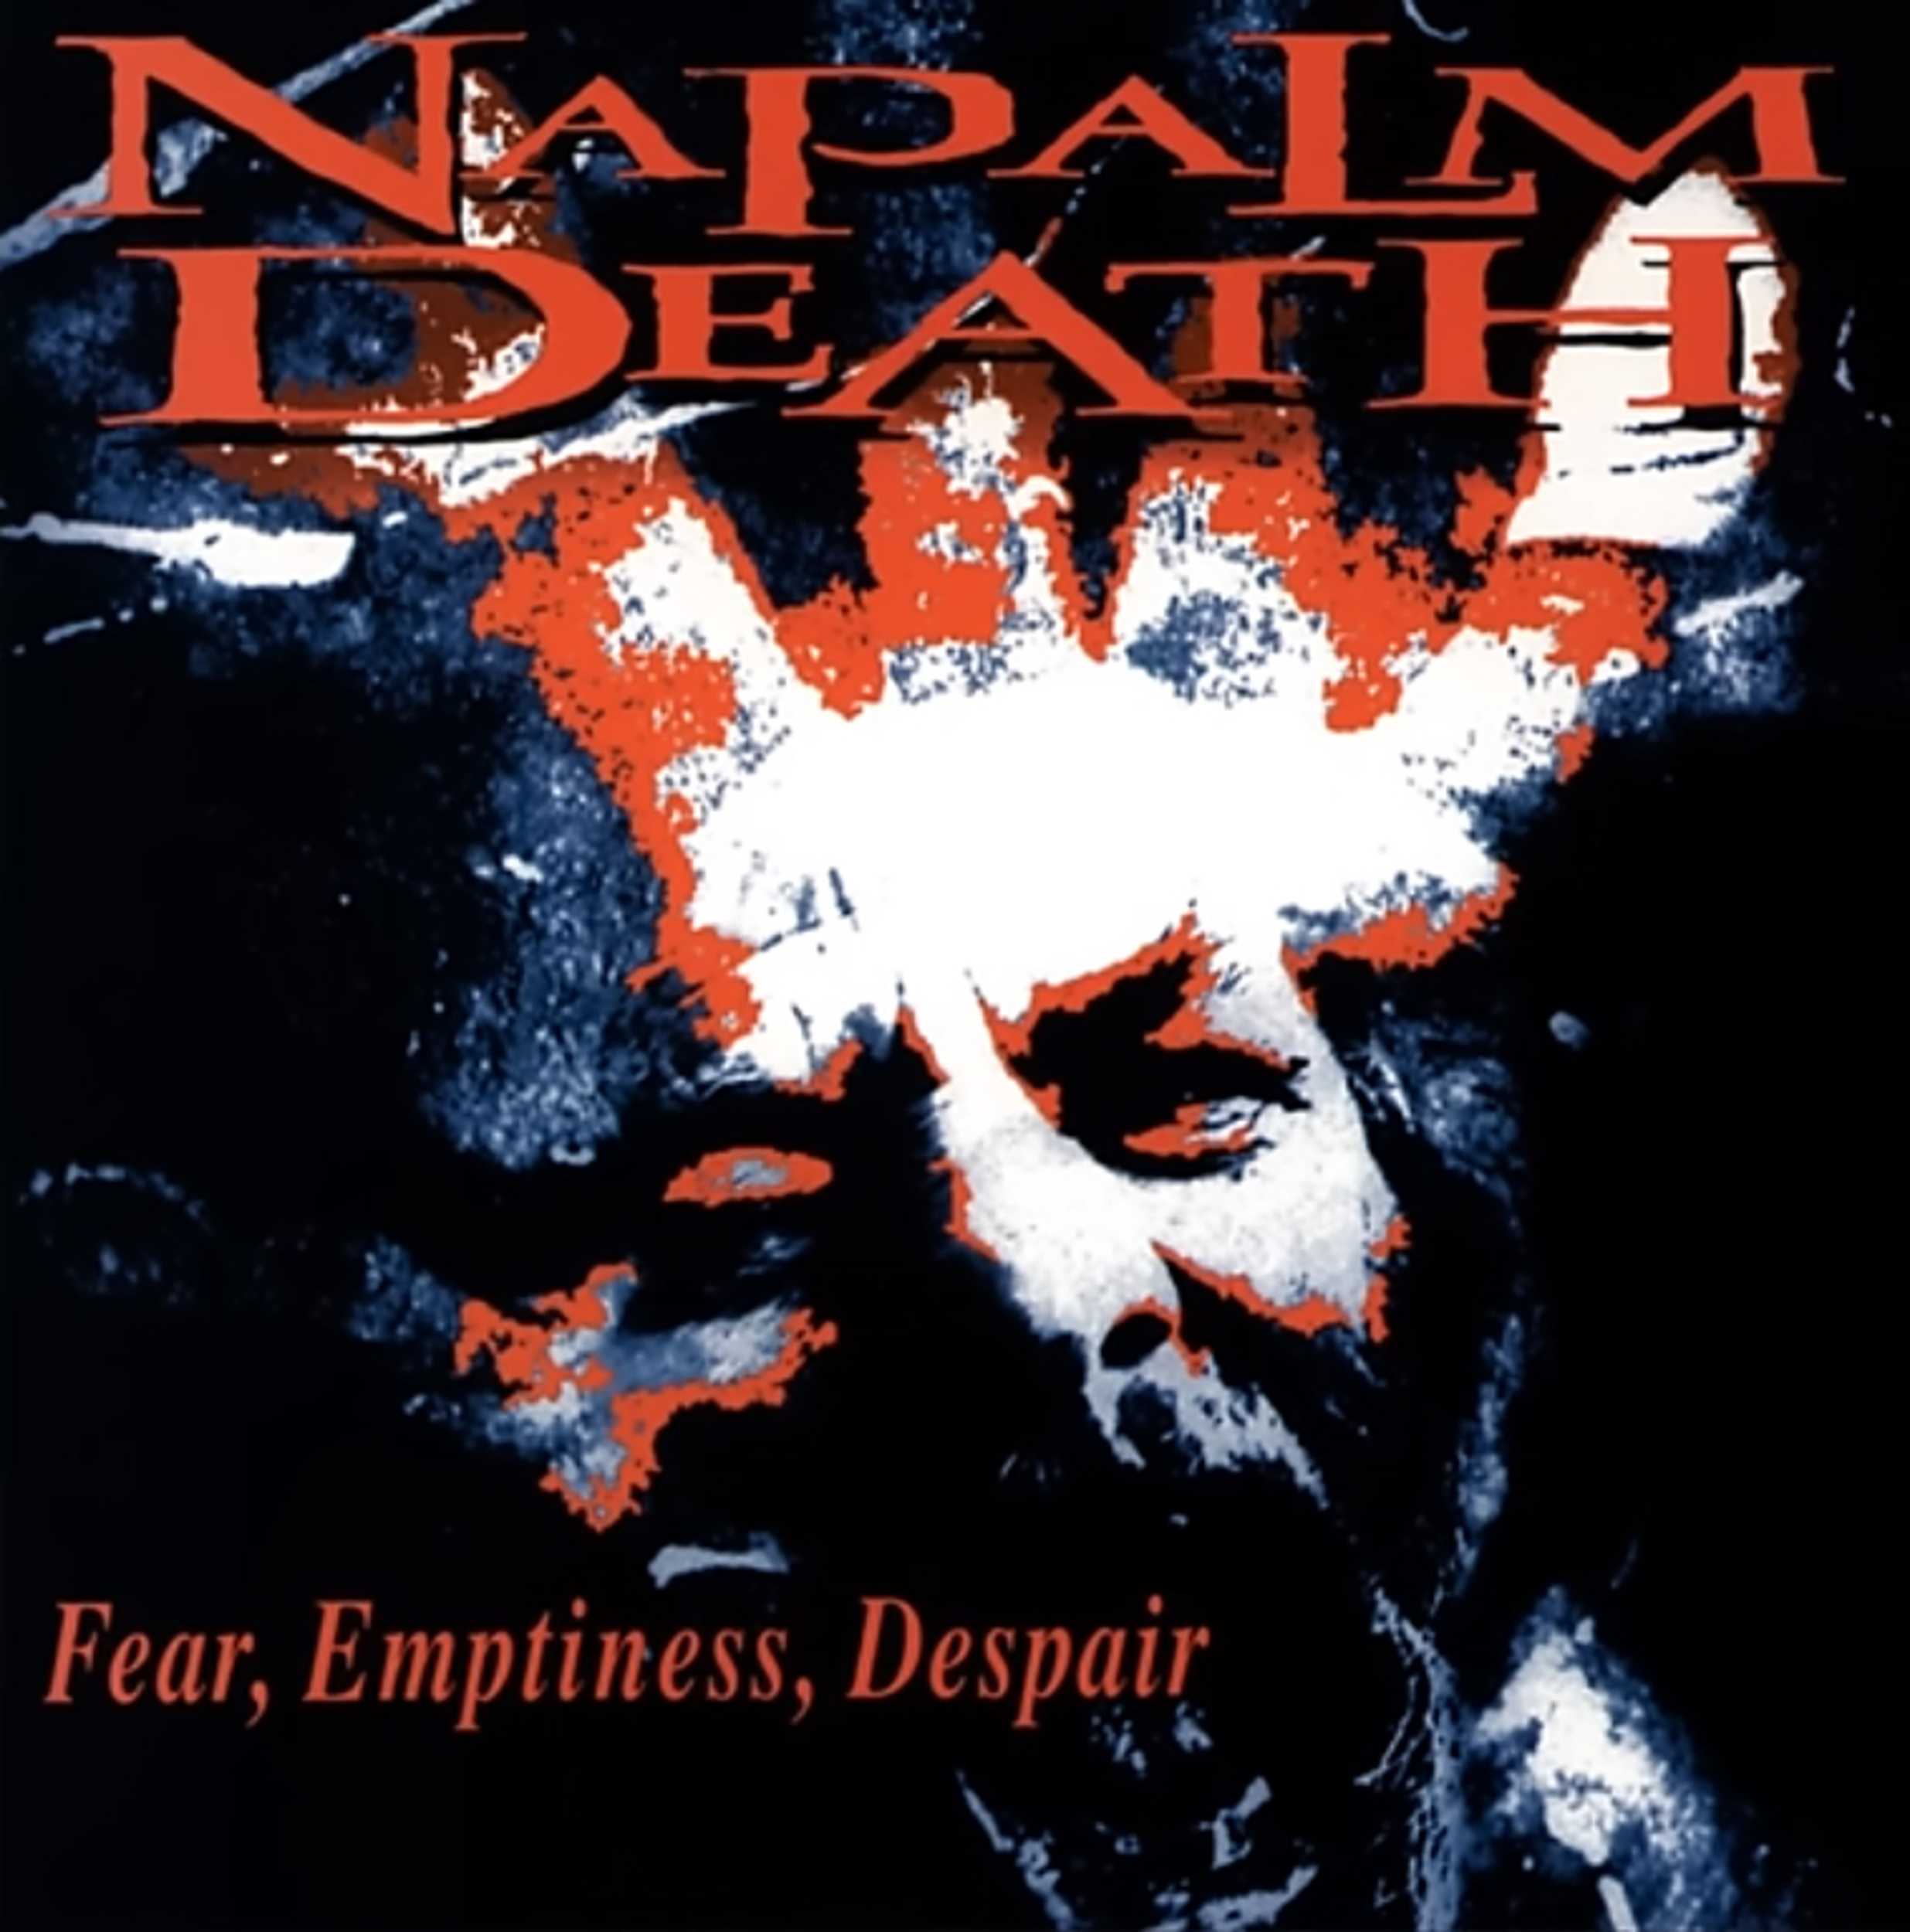 <p>Would you ever expect a band like Napalm Death to be on a major label? No one else expected it, but <em>Fear, Emptiness, Despair</em> was released by Columbia Records... through a partnership with Earache, of course. Naturally, Columbia had their influence in the mix, and more elements of groove metal were present. In the end, however, Napalm Death is Napalm Death. While some members of the band were unhappy with the final product, the album was generally well received.</p><p><a href='https://www.msn.com/en-us/community/channel/vid-cj9pqbr0vn9in2b6ddcd8sfgpfq6x6utp44fssrv6mc2gtybw0us'>Follow us on MSN to see more of our exclusive entertainment content.</a></p>